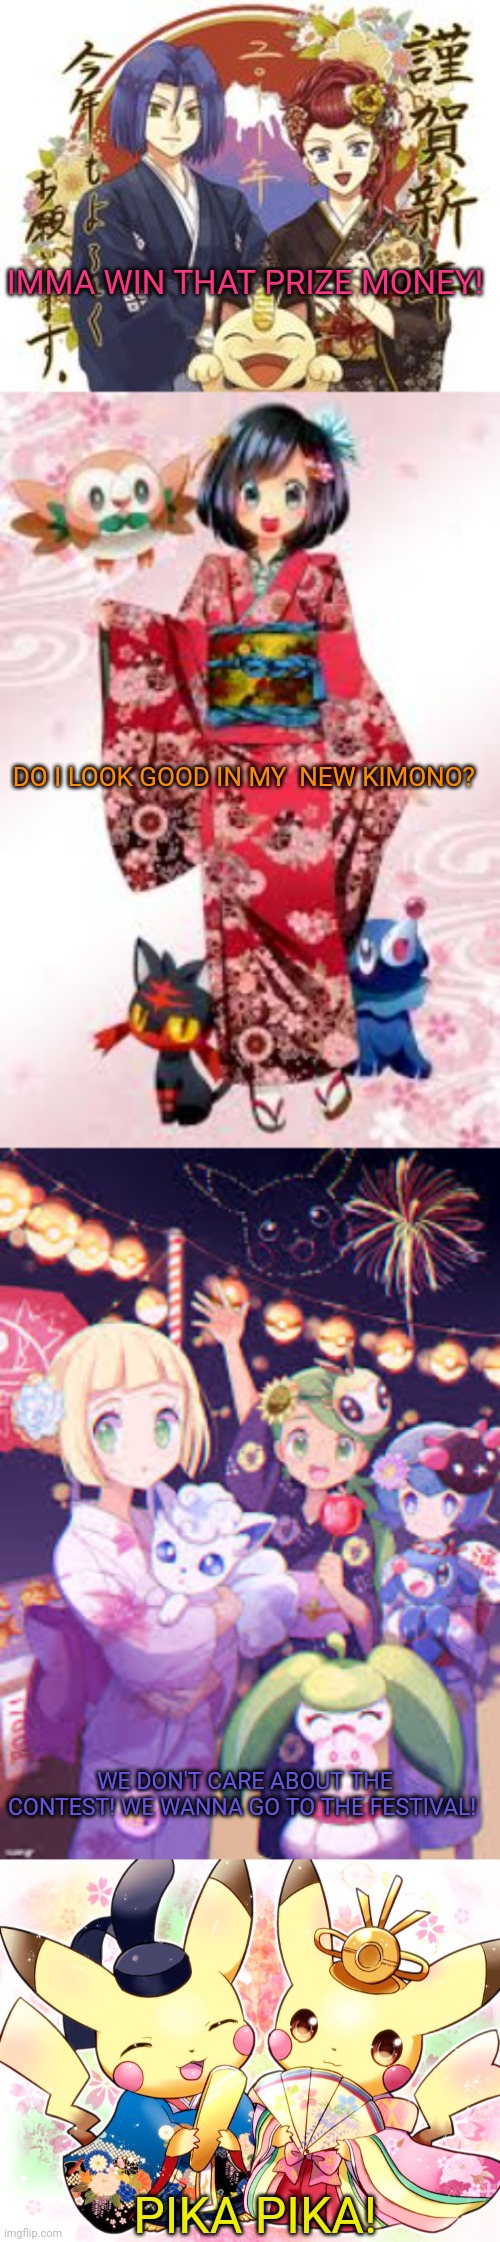 Pokemon kimono contest | IMMA WIN THAT PRIZE MONEY! DO I LOOK GOOD IN MY  NEW KIMONO? WE DON'T CARE ABOUT THE CONTEST! WE WANNA GO TO THE FESTIVAL! PIKA PIKA! | image tagged in pokemon,kimono,contest,pikachu,team rocket | made w/ Imgflip meme maker